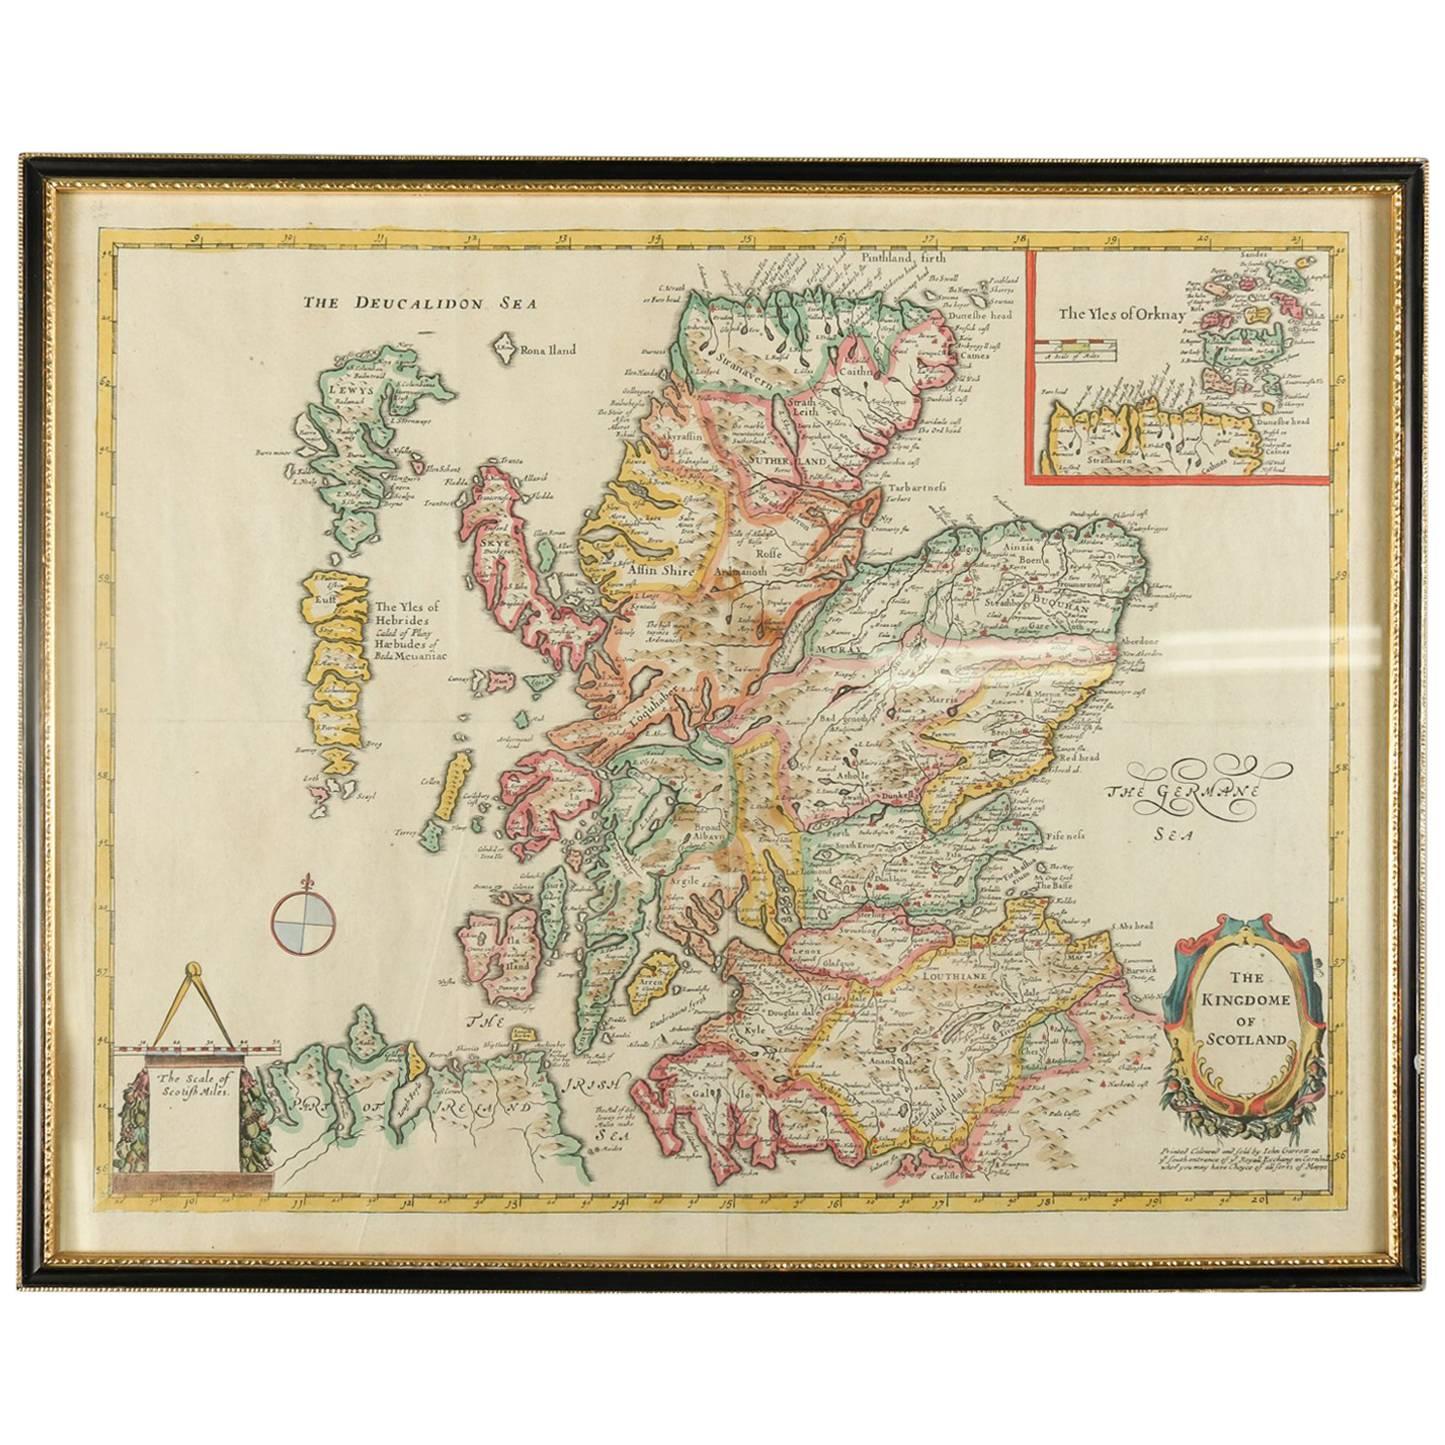 Map of "The Kingdom of Scotland" Printed & Colored by J. Garrett, 19th Century